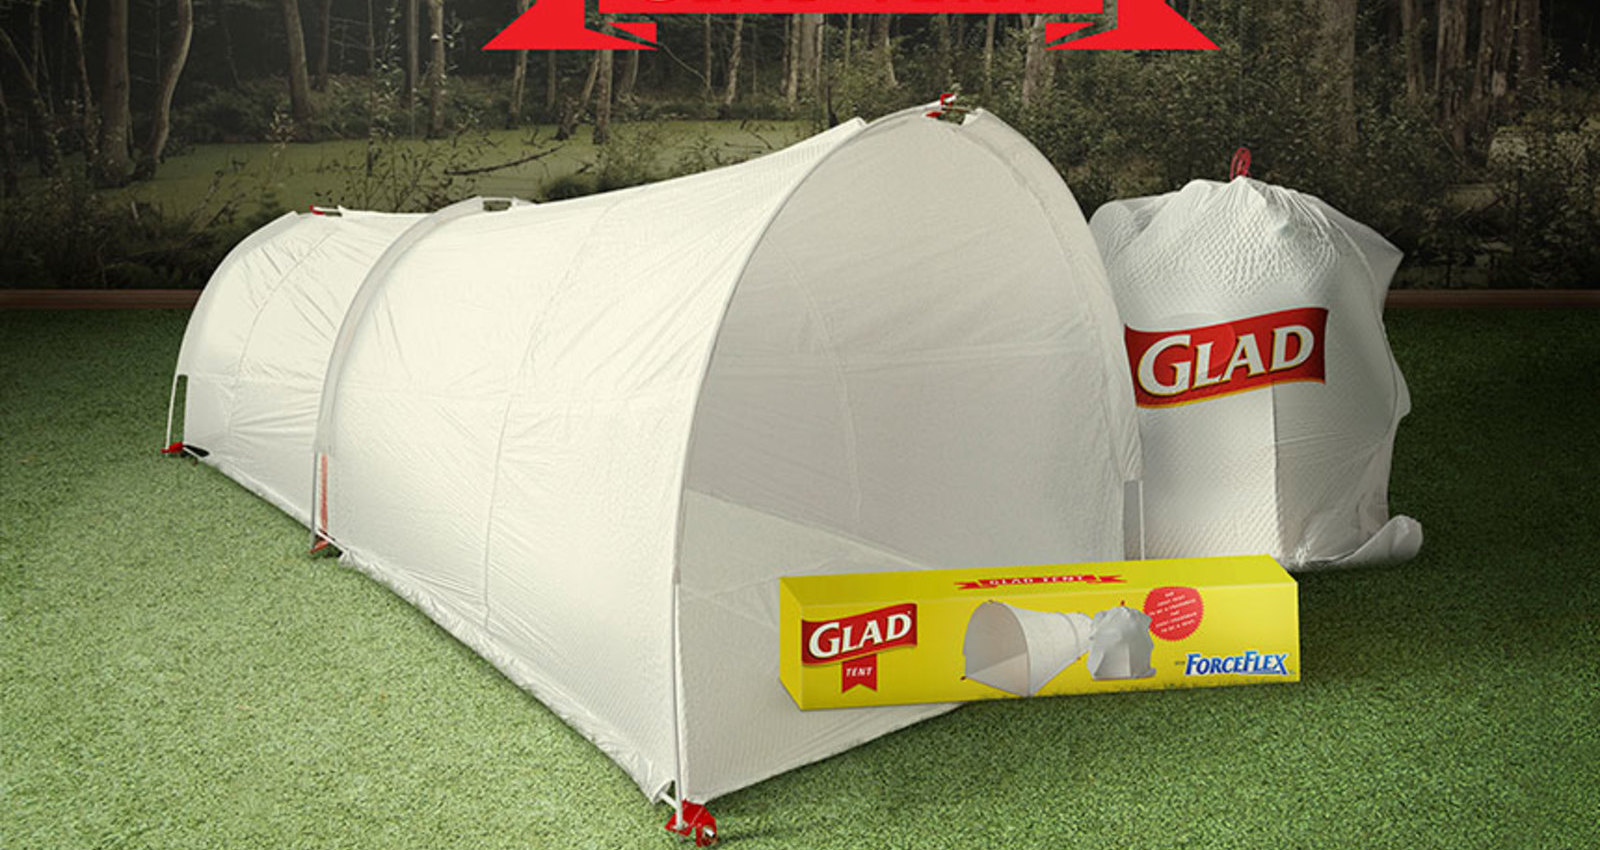 The Glad Tent